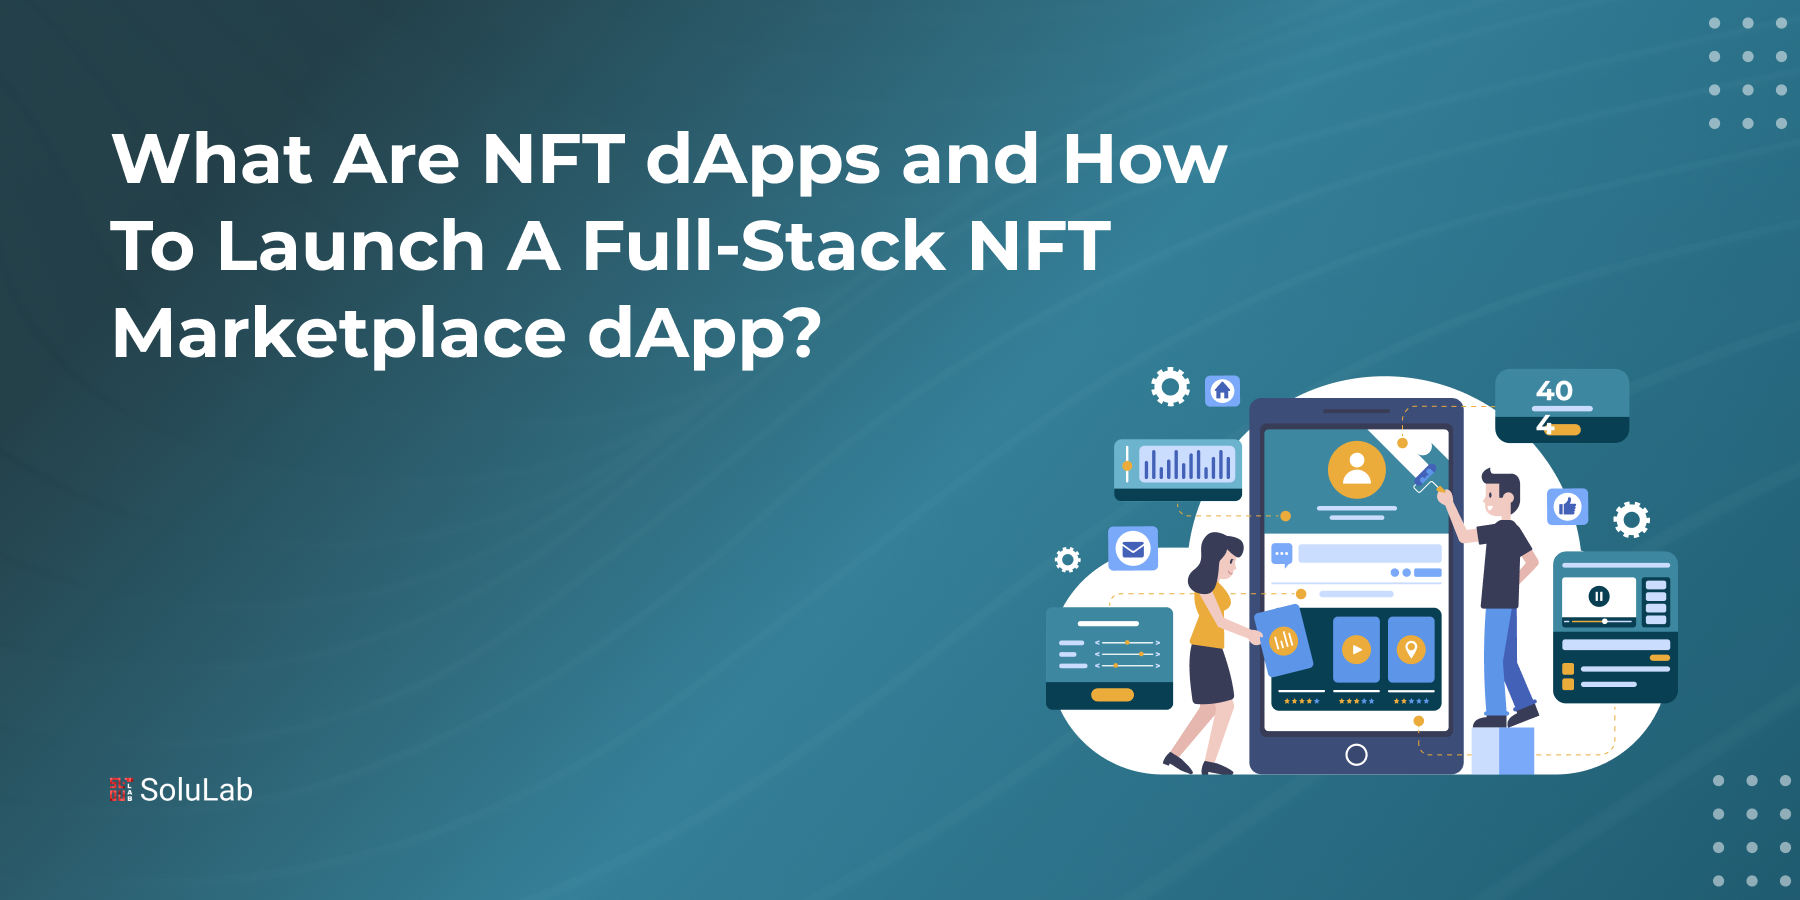 What Are NFT dApps and How To Launch A Full-Stack NFT Marketplace dApp?